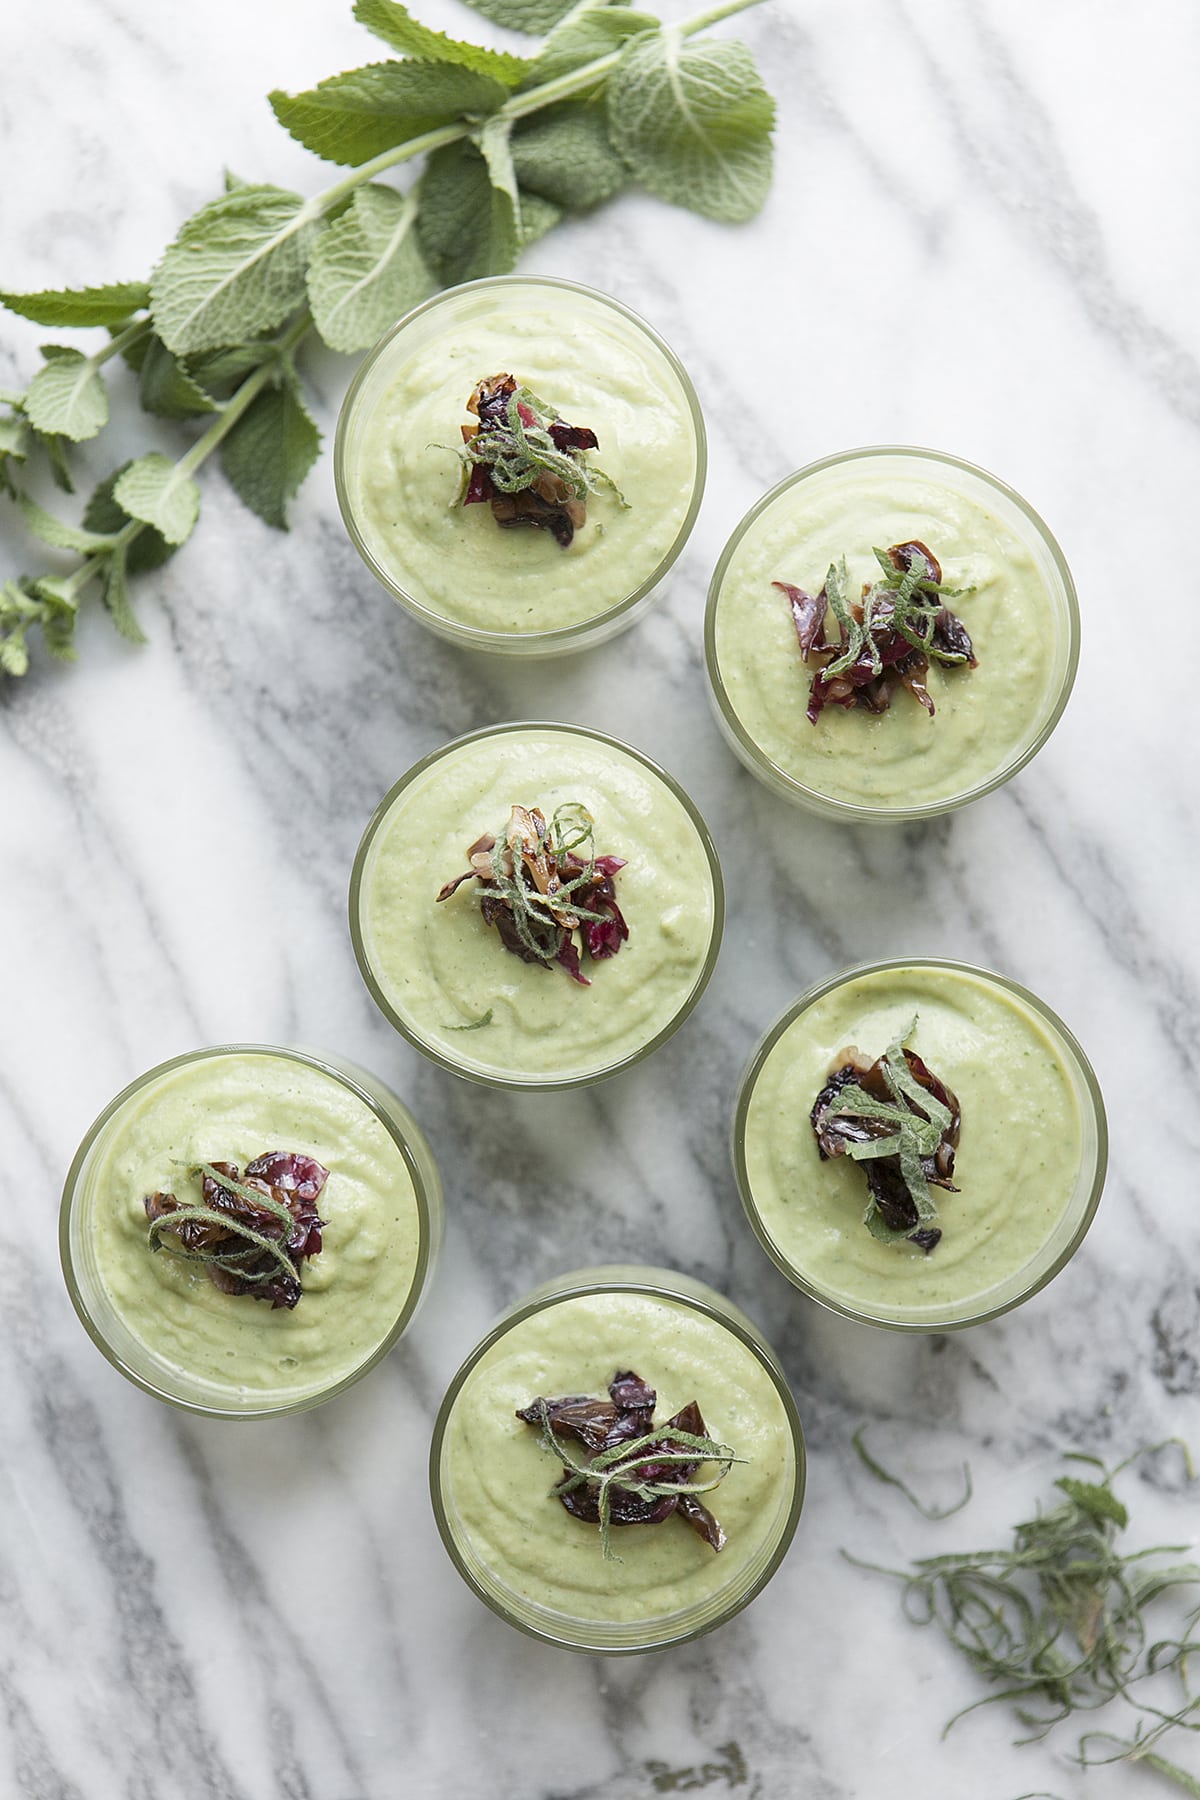 Chilled Avocado Mint Soup | Roasted Radicchio | Easy Appetizers Recipe | Jessica Brigham Blog